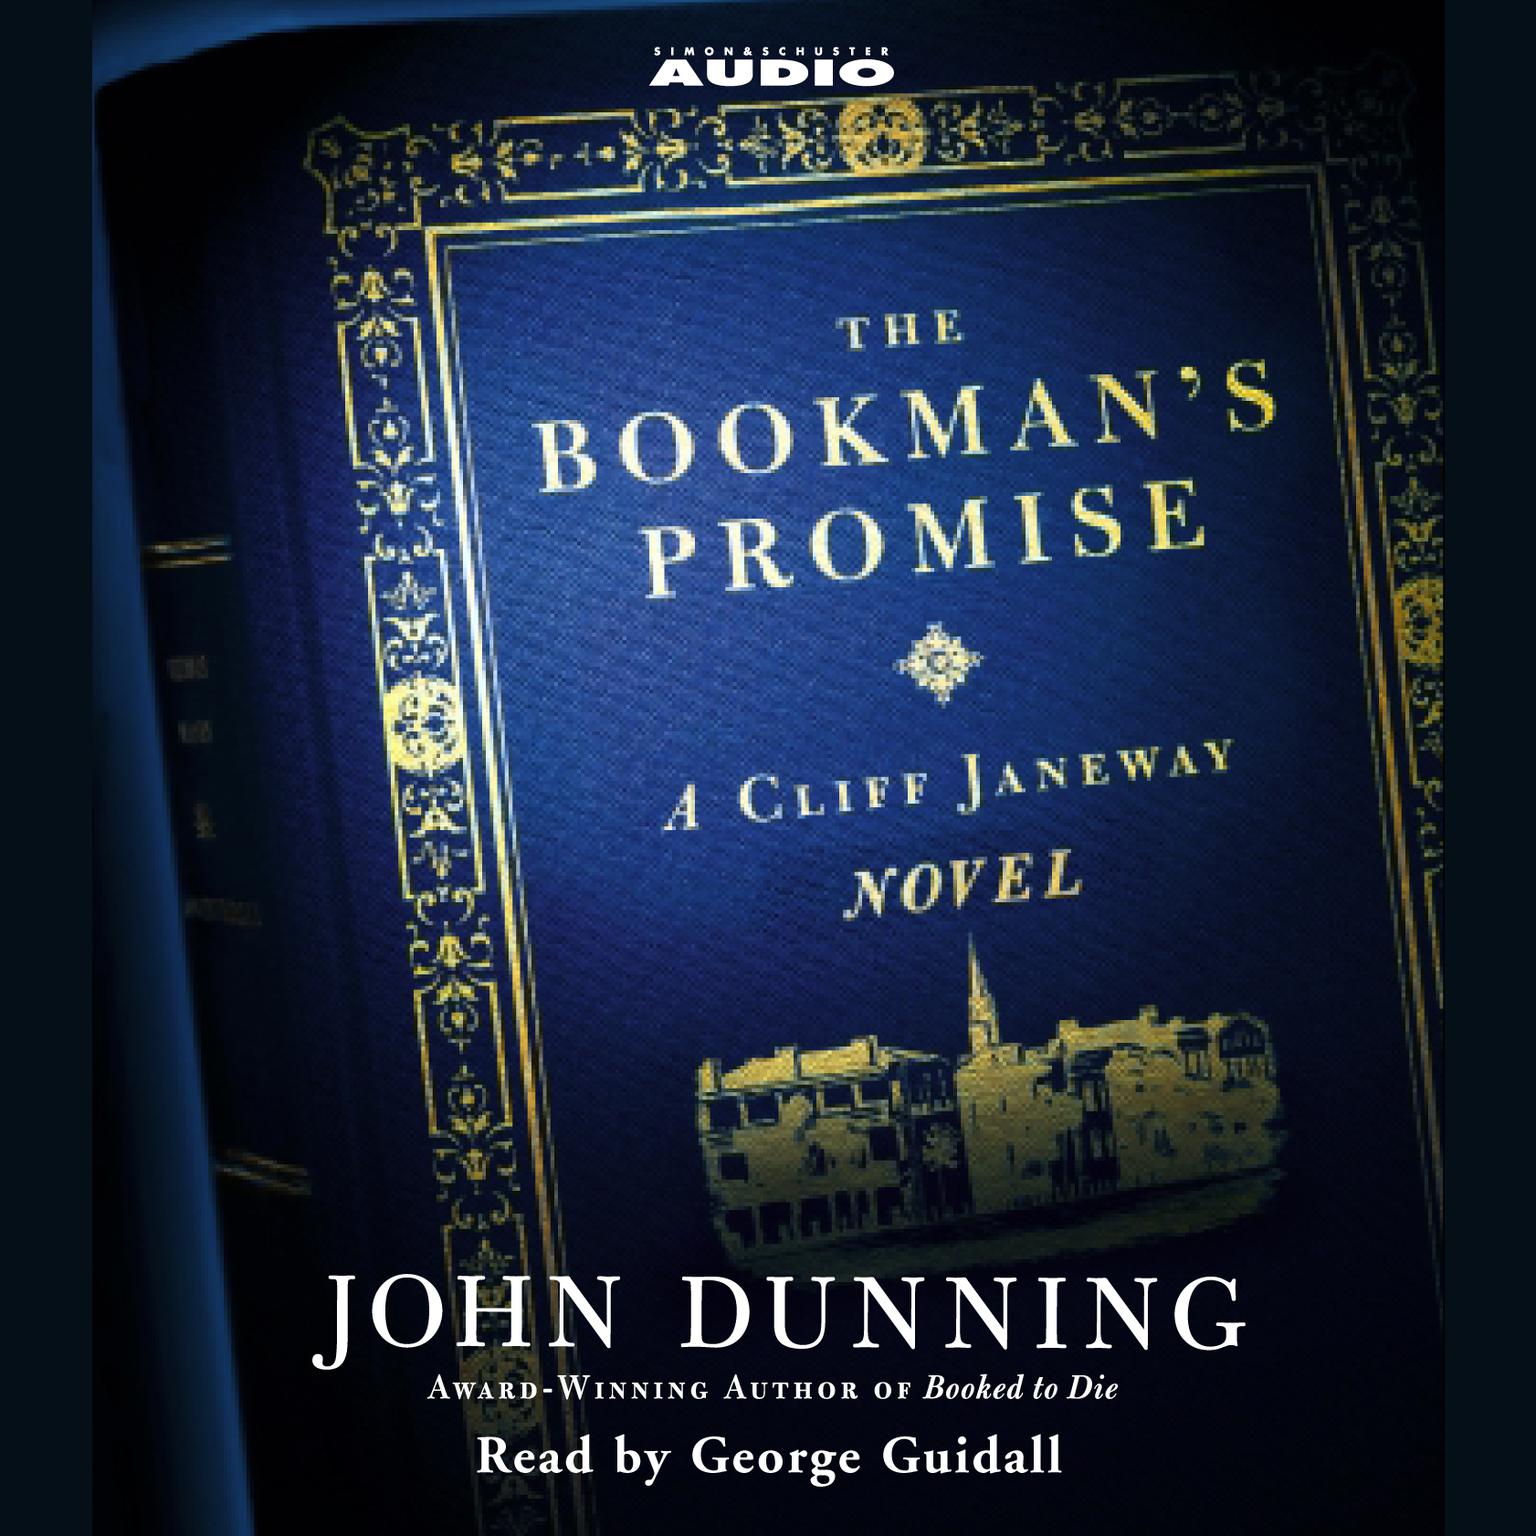 The Bookman’s Promise (Abridged): A Cliff Janeway Novel Audiobook, by John Dunning